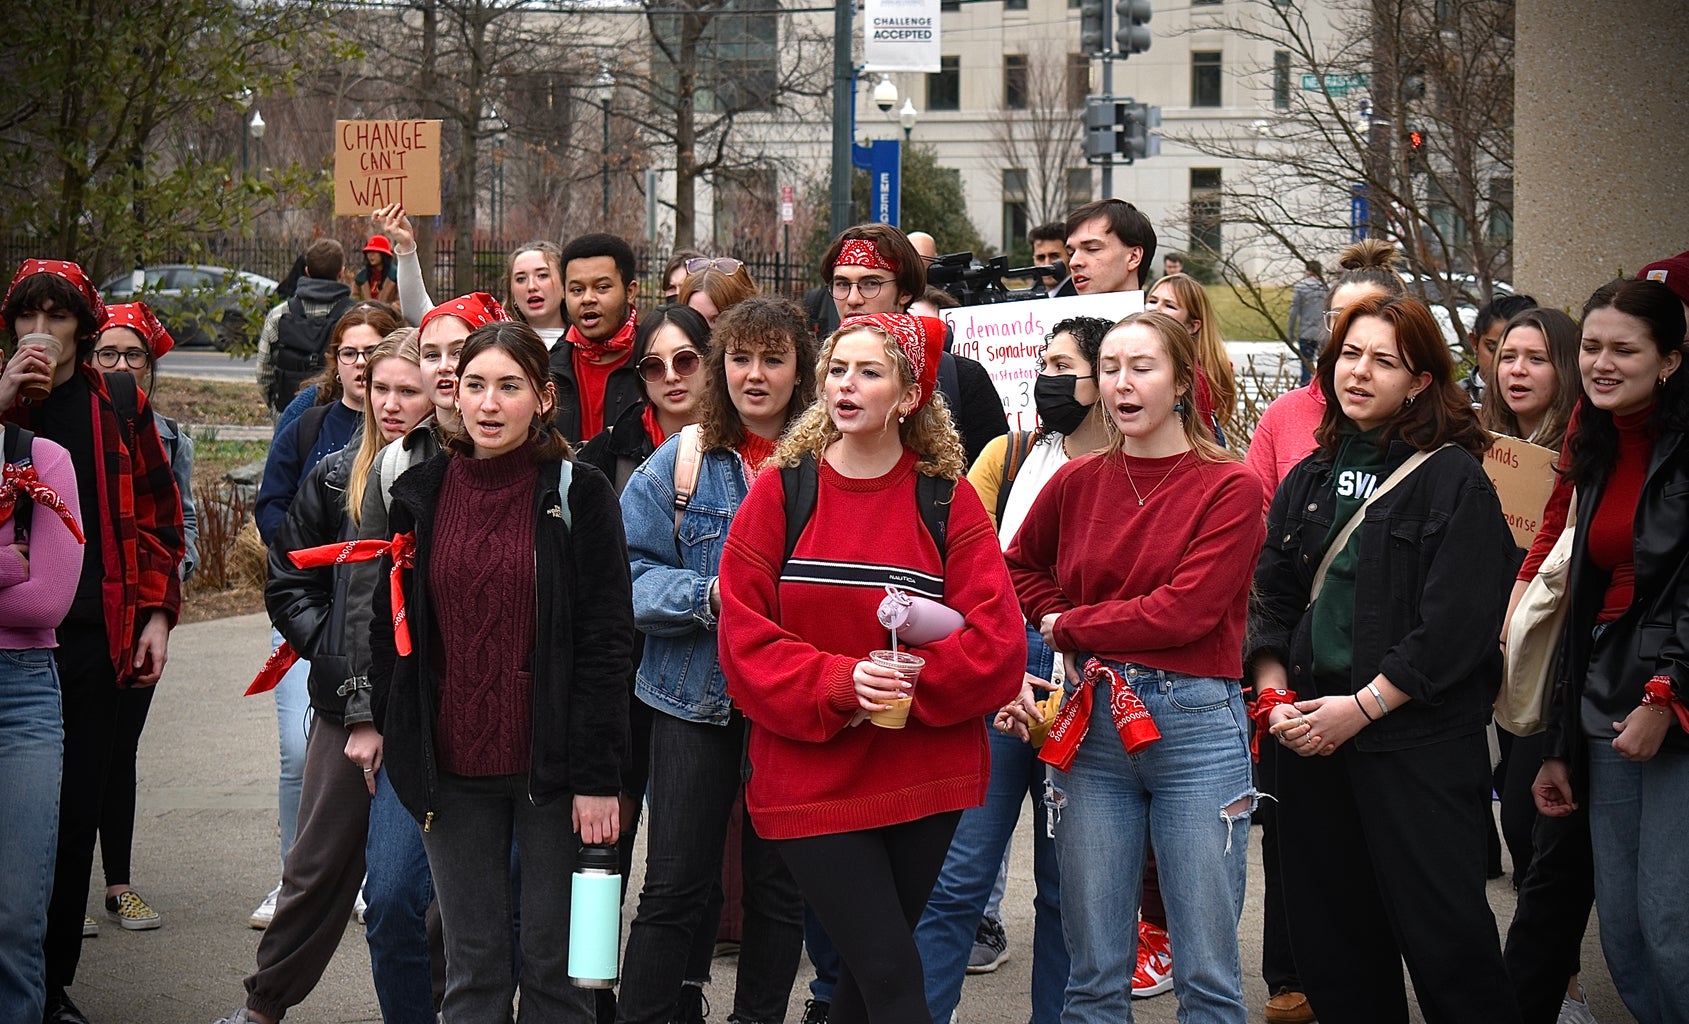 A small crowd of college students, many wearing red, in the midst of a chant supporting sexual assault survivors.